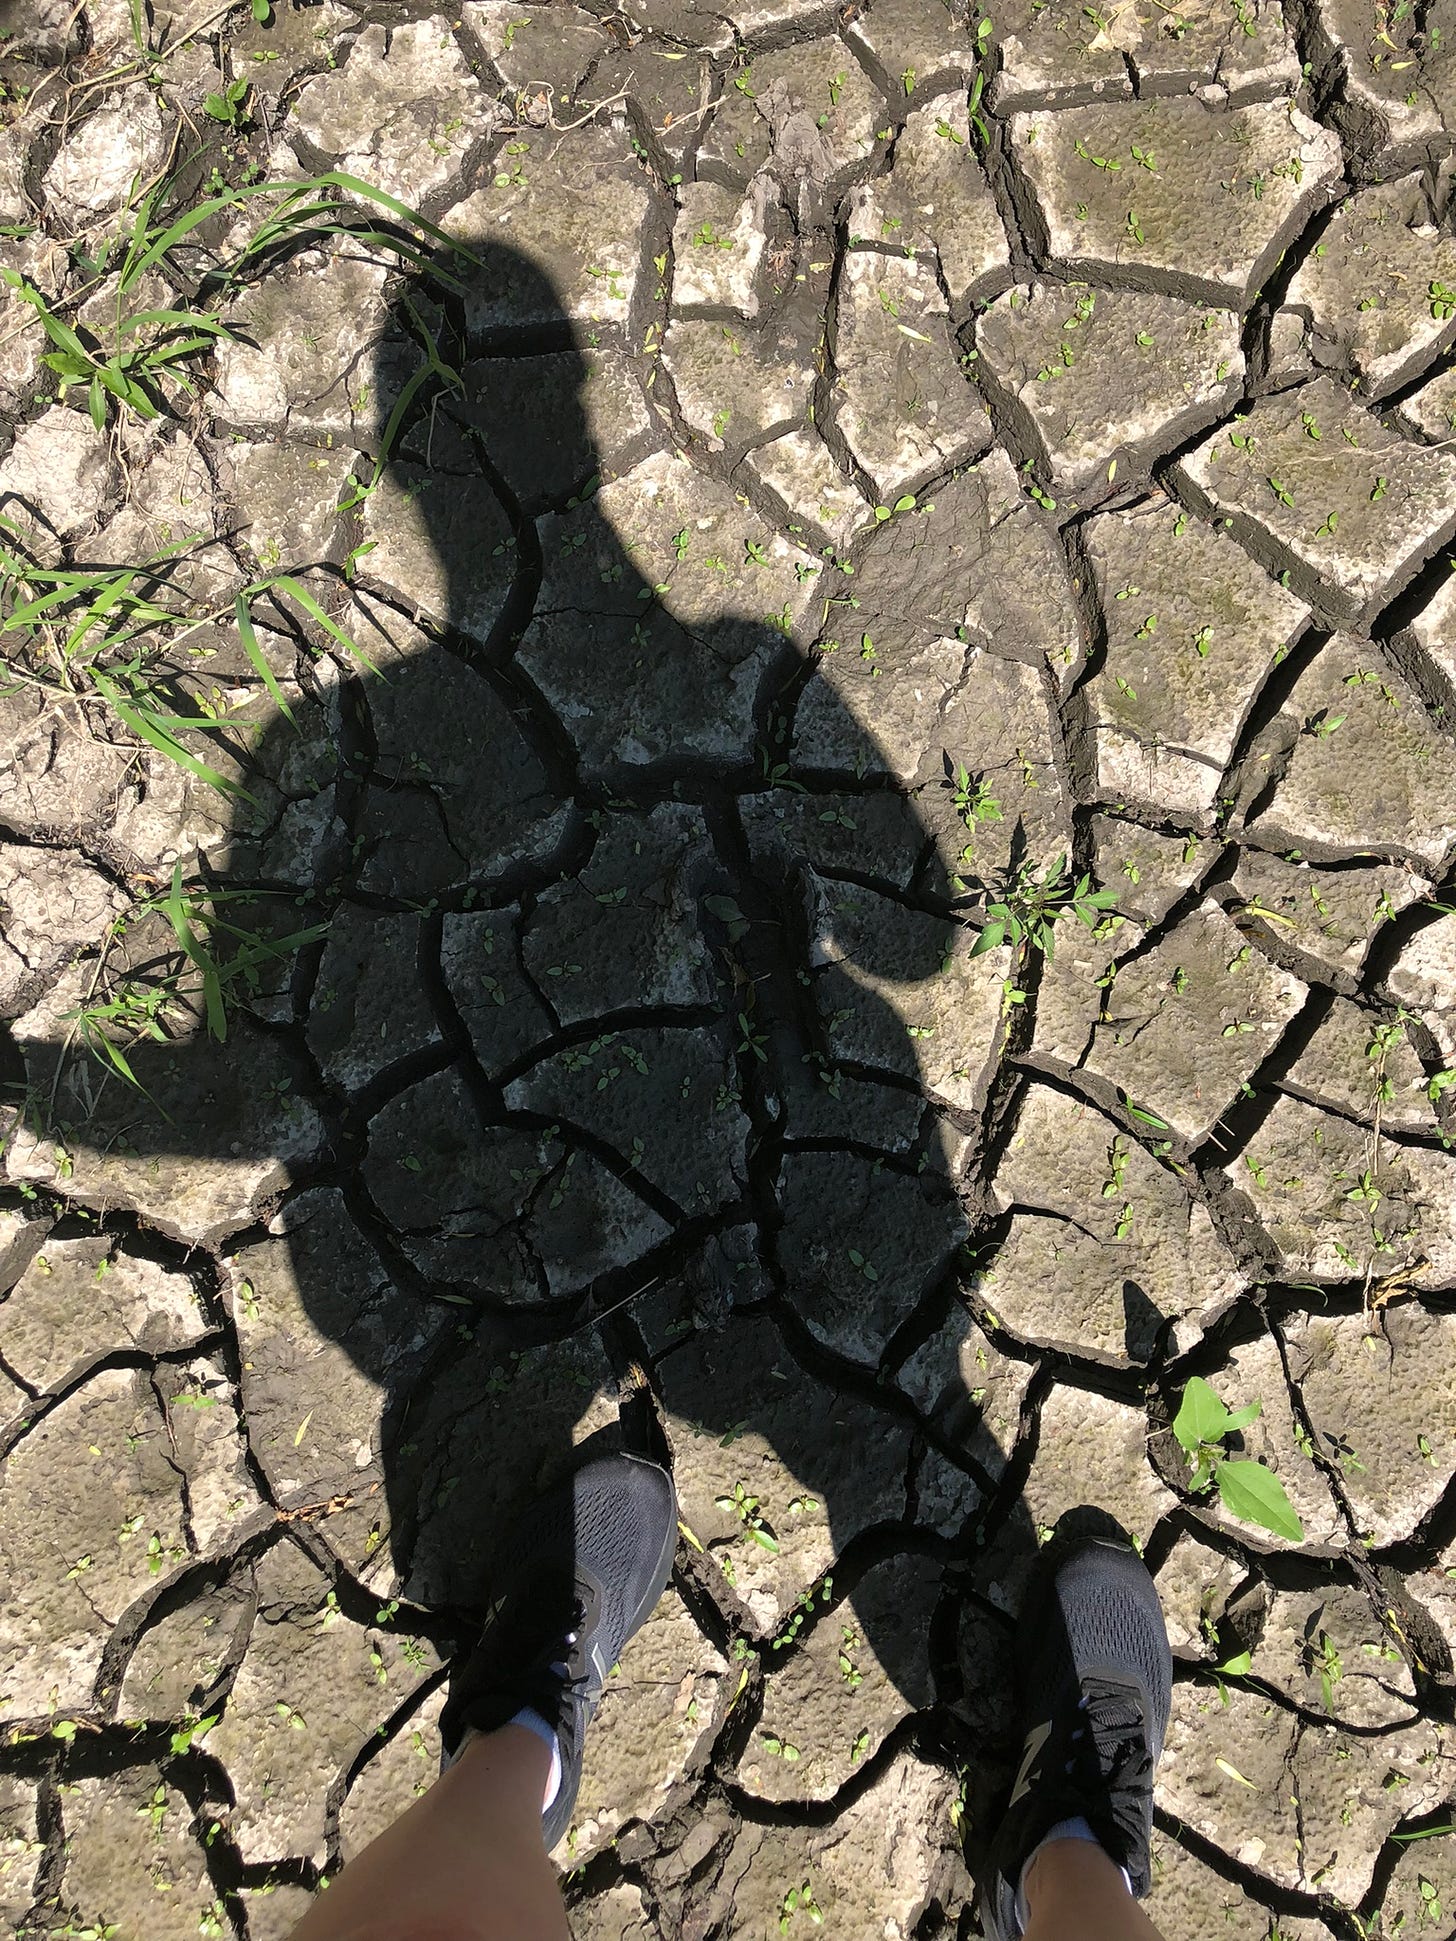 the shadow of a person on cracked earth